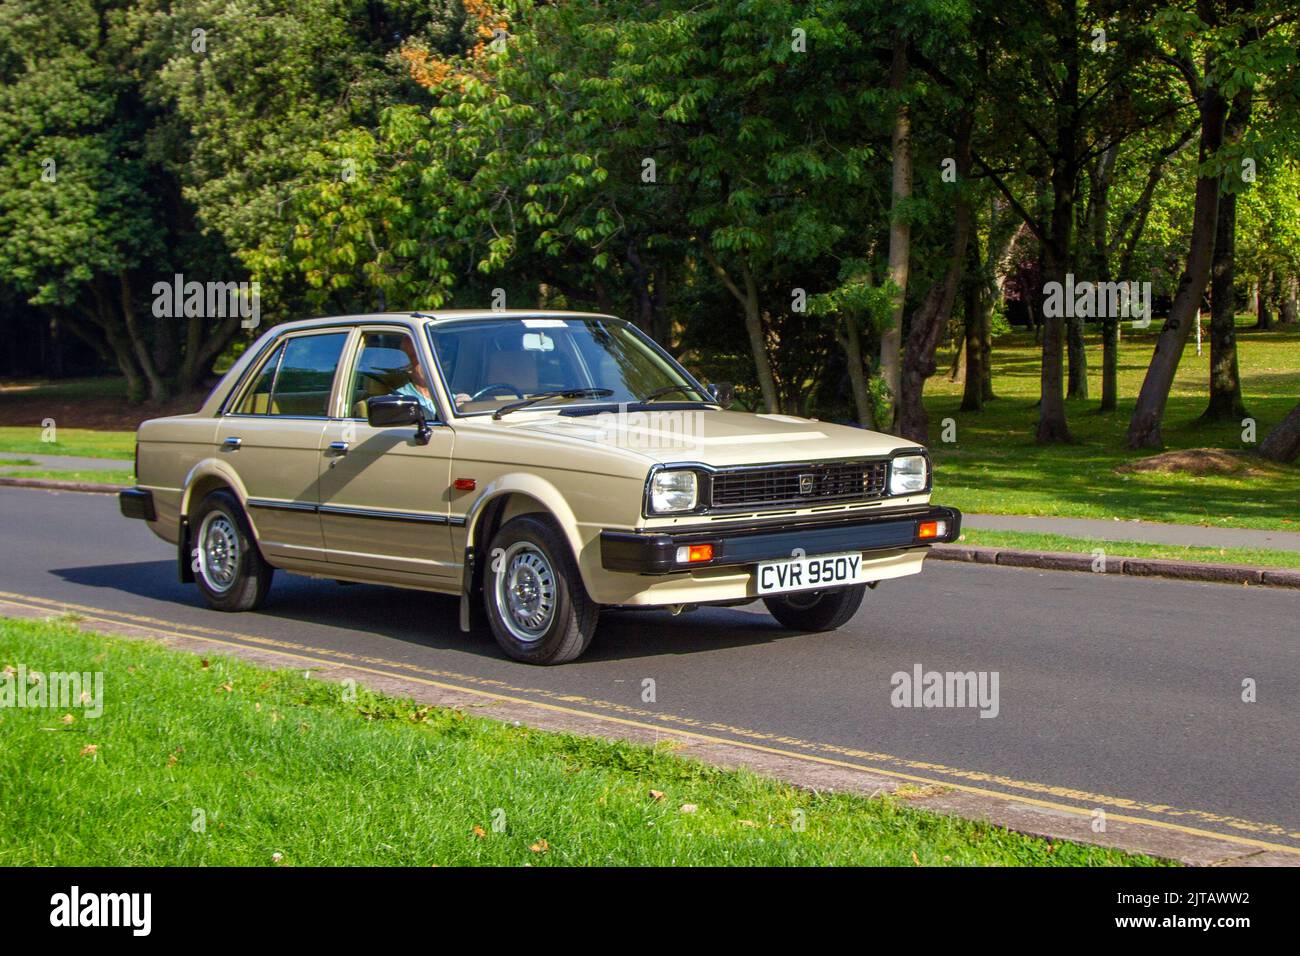 1983 80s eighties Beige TRIUMPH ACCLAIM 1335cc Petrol; Cars arriving at the annual Stanley Park Classic Car Show in the park gardens. Stanley Park classics yesteryear Motor Show Hosted By Blackpool Vintage Vehicle Preservation Group, UK. Stock Photo